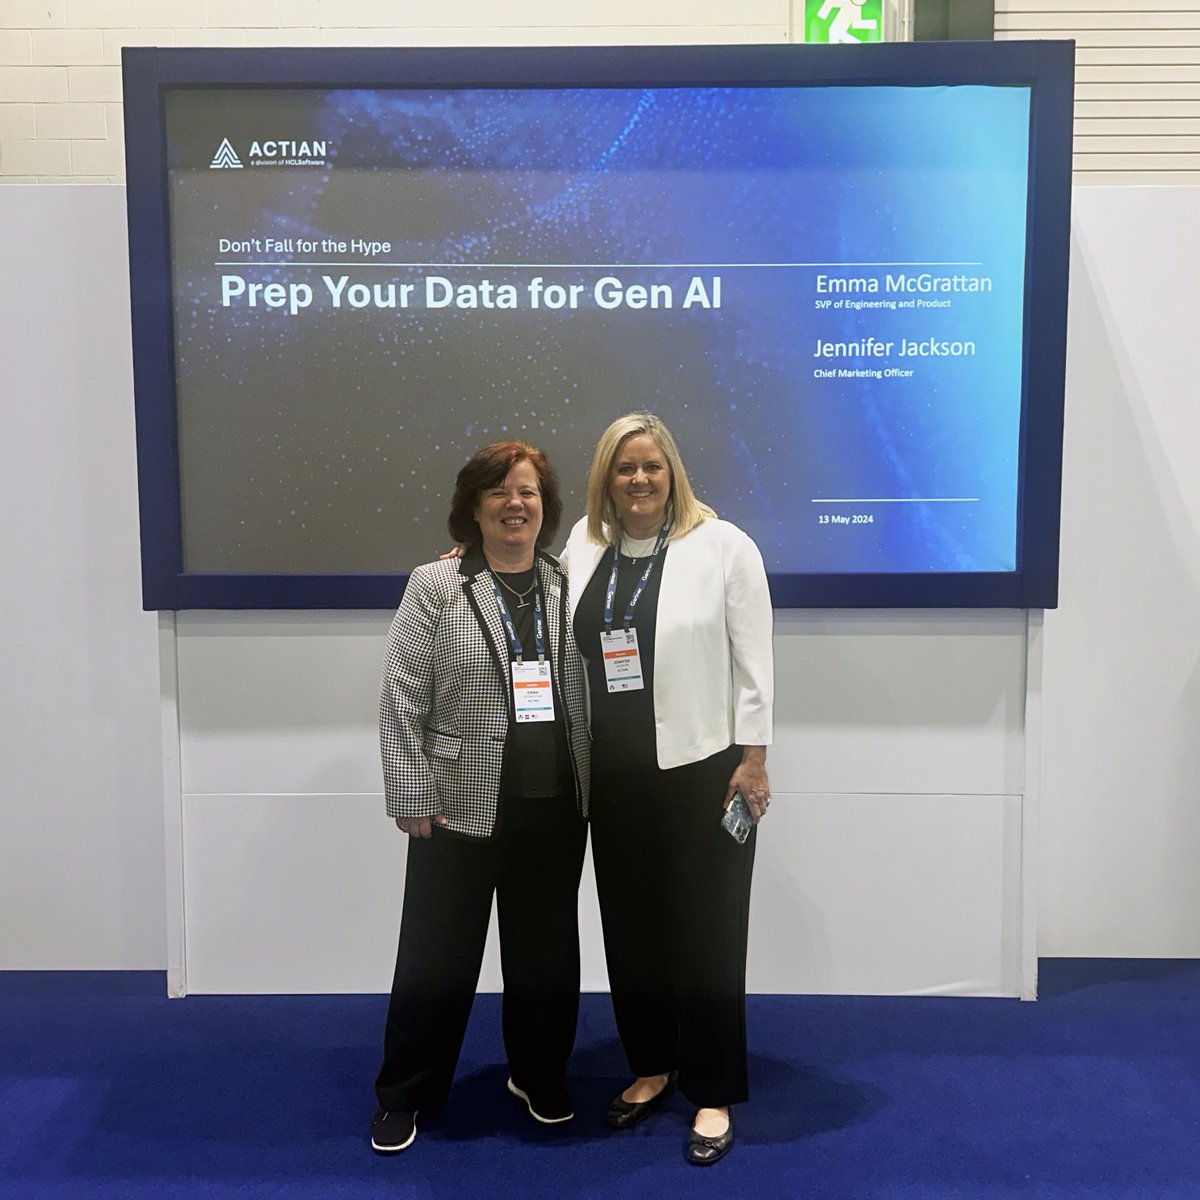 Glad to see so many attend our session at Gartner® London about the possibilities and pitfalls of implementing #GenAI! 

Make time today to enjoy our coffee bar ☕️ and then stop by booth #512. We look forward to connecting with you! bit.ly/3UxhjLv

#Gartner #GartnerDA